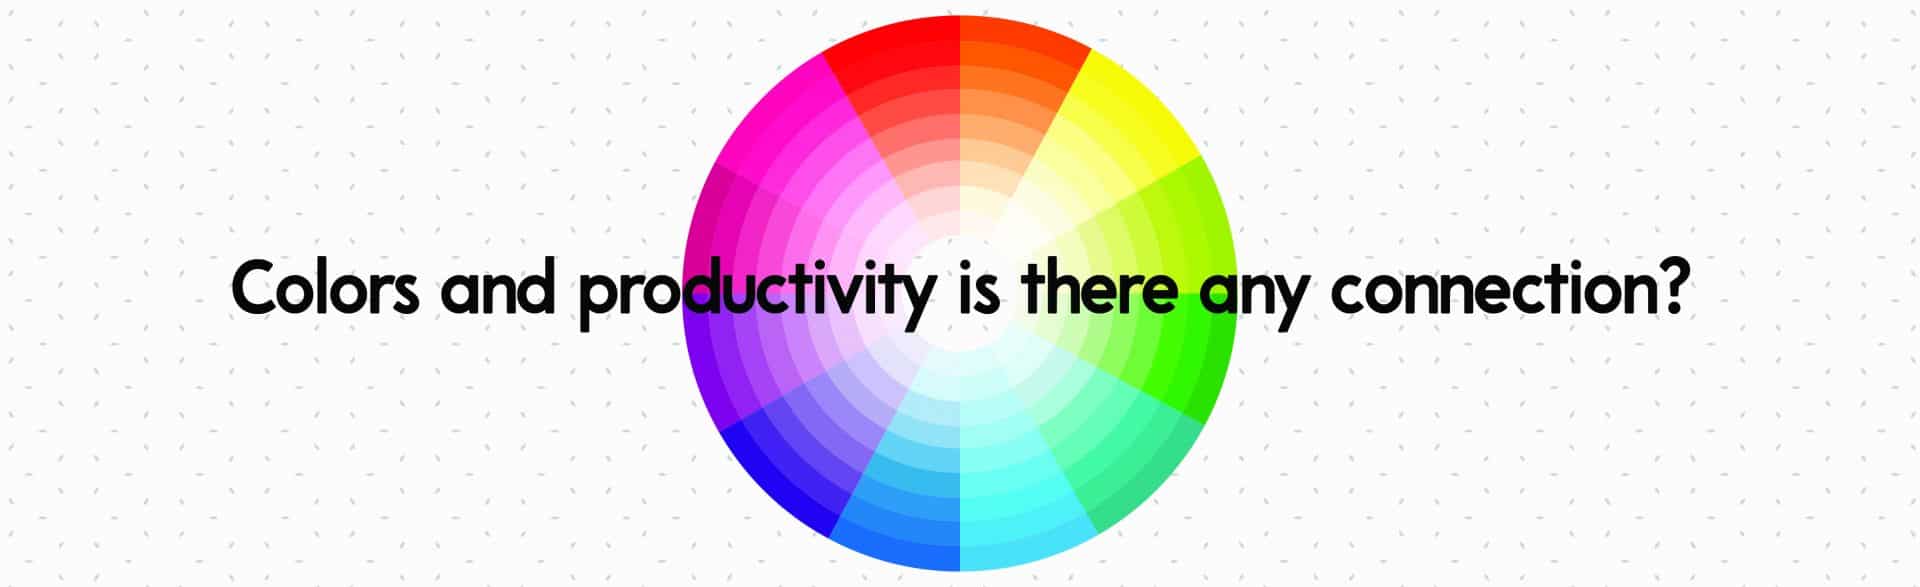 Colors and productivity is there any connection?